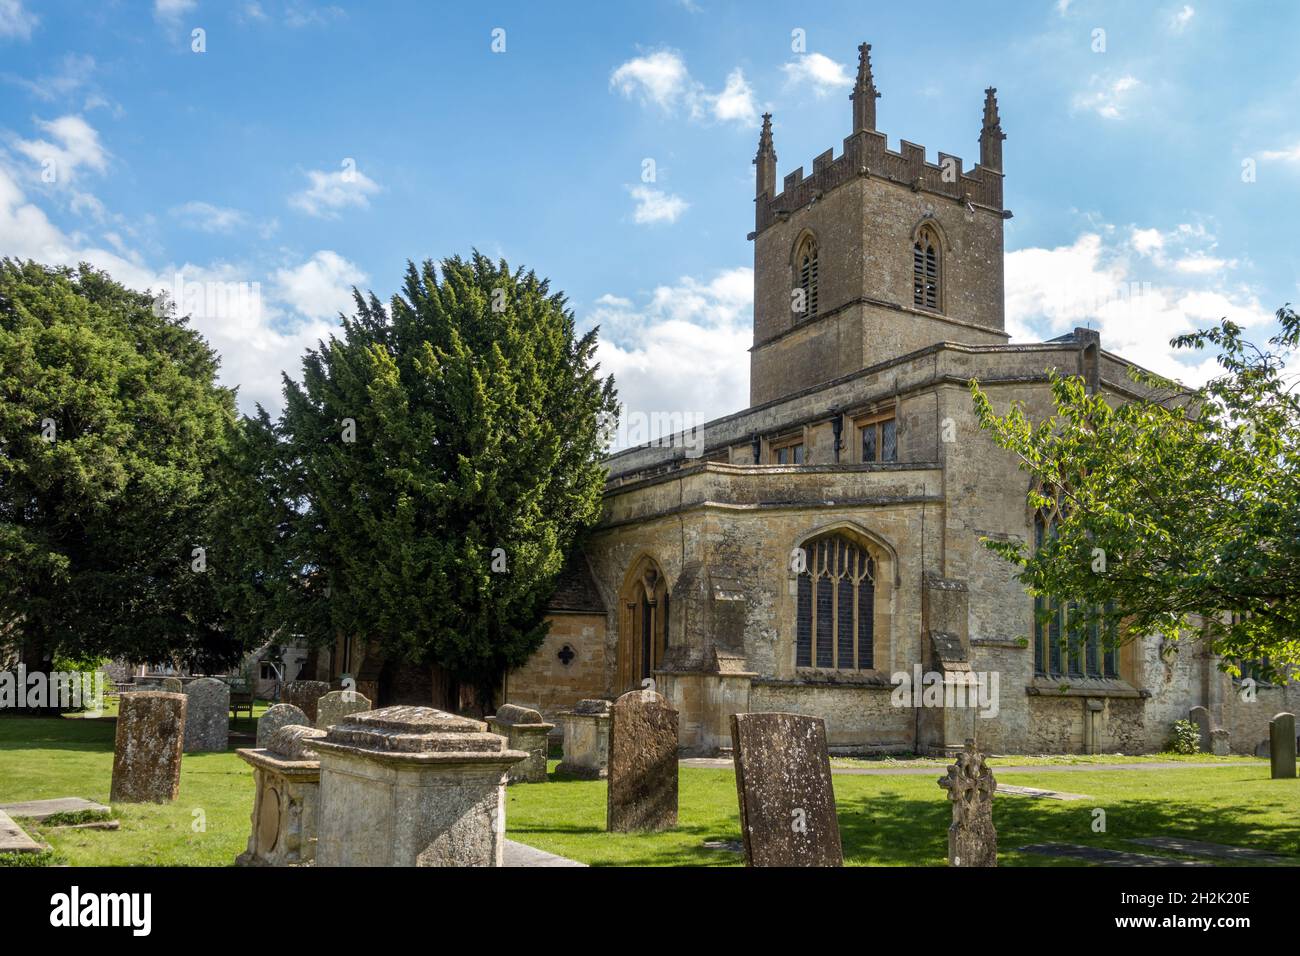 St Edwards chiesa parrocchiale, Stow on the Wold town, Gloucestershire, Cotswolds, Inghilterra Foto Stock